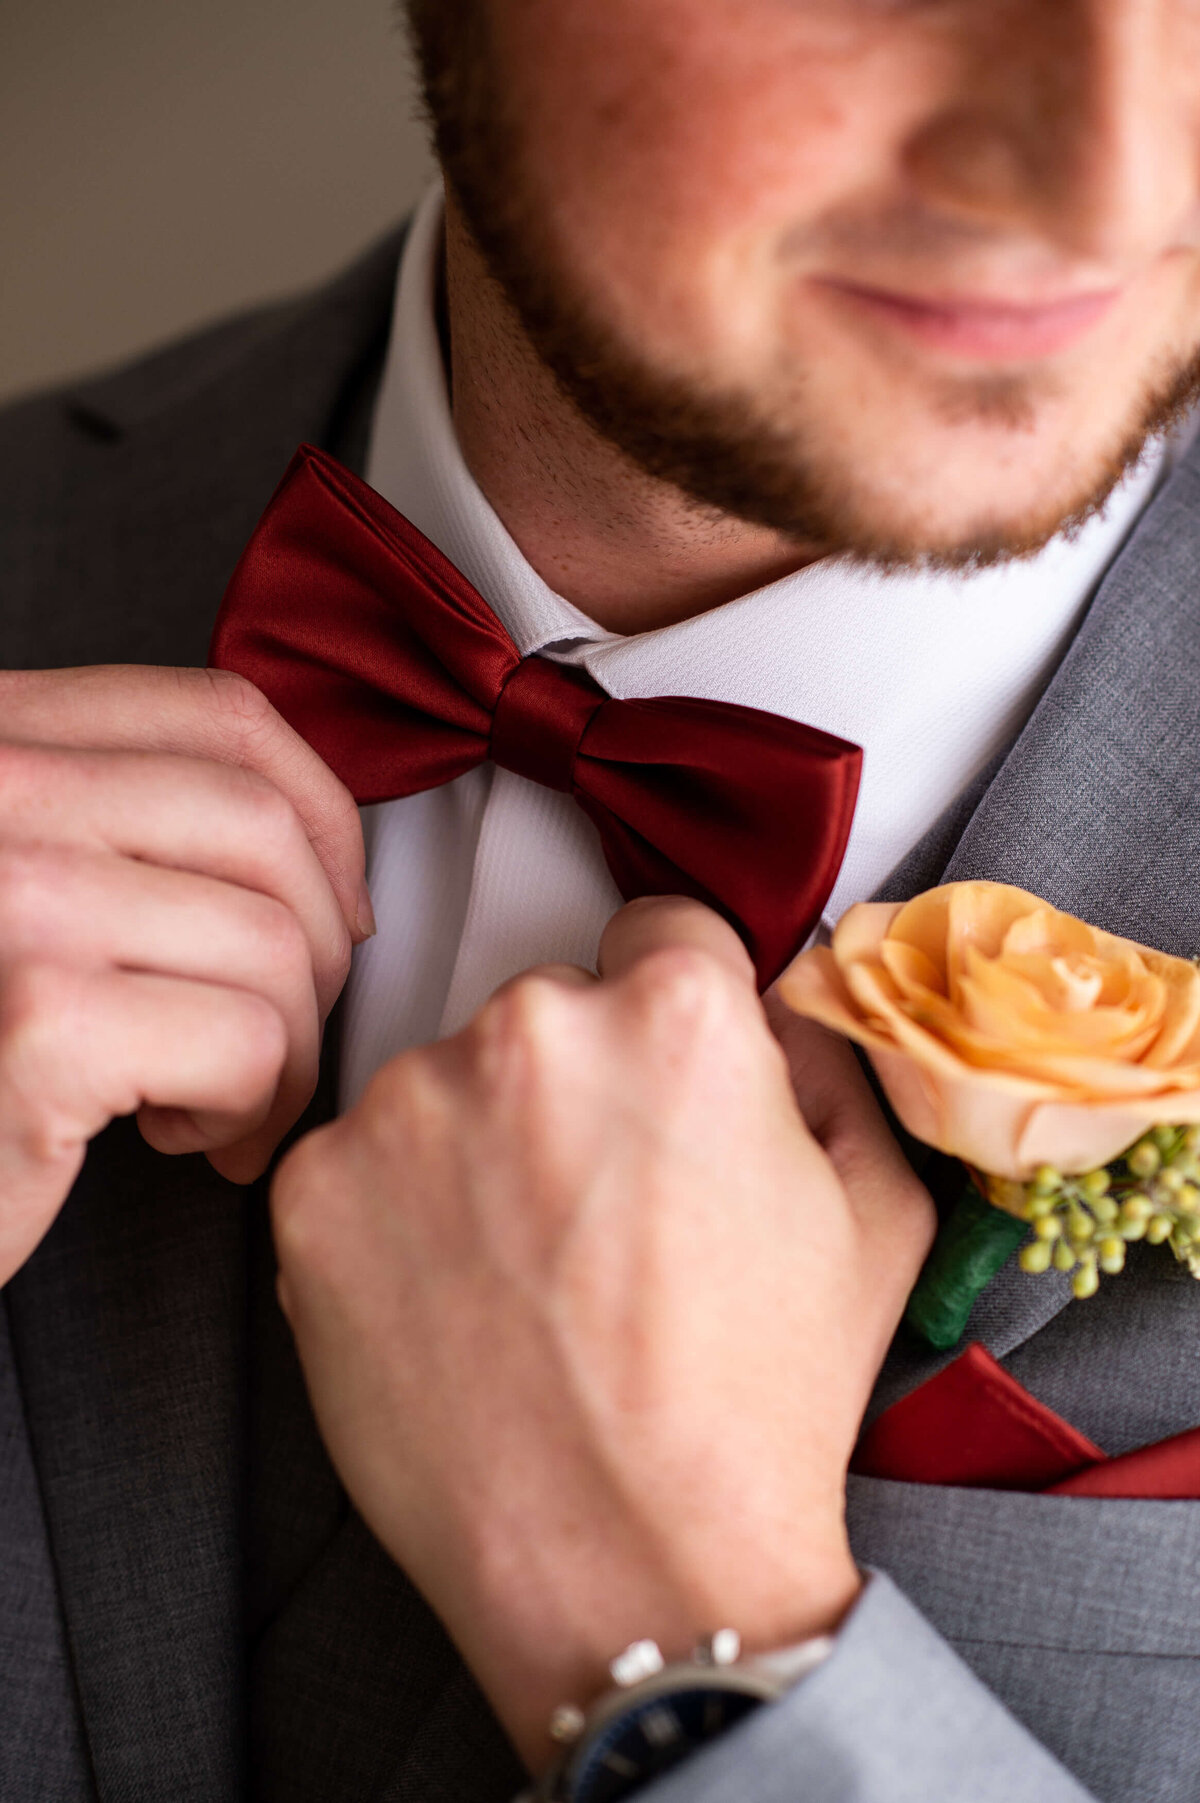 Ottawa wedding photography of a burgundy bow tie and yellow rose taken in the bridal suite at Strathmere wedding venue in Ottawa